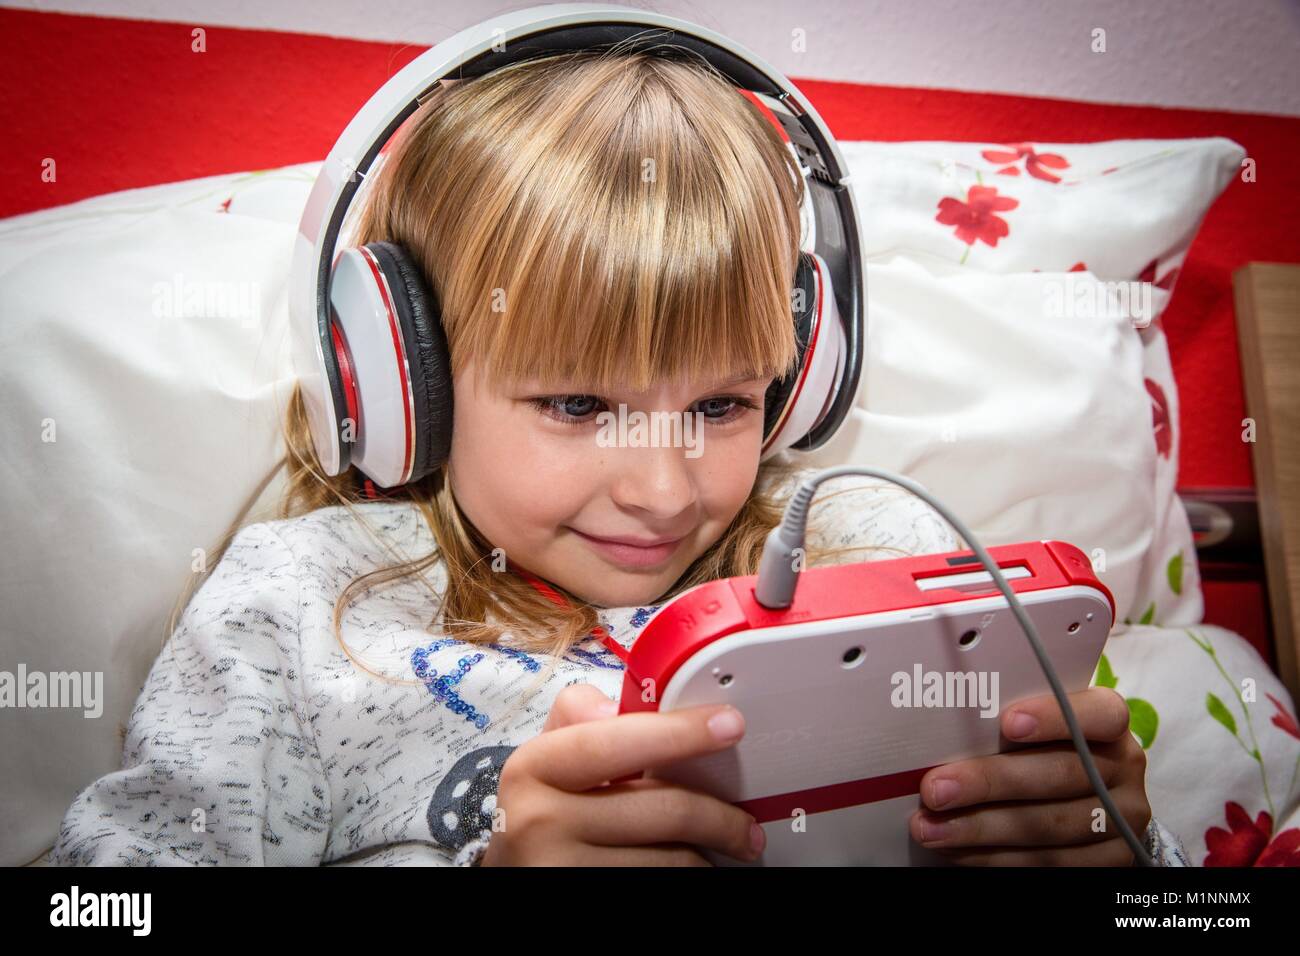 6 year old girl with headphone on plays with a Nintendo DS on a bed,  Kernen, Germany, Nov. 5, 2017. | usage worldwide Stock Photo - Alamy